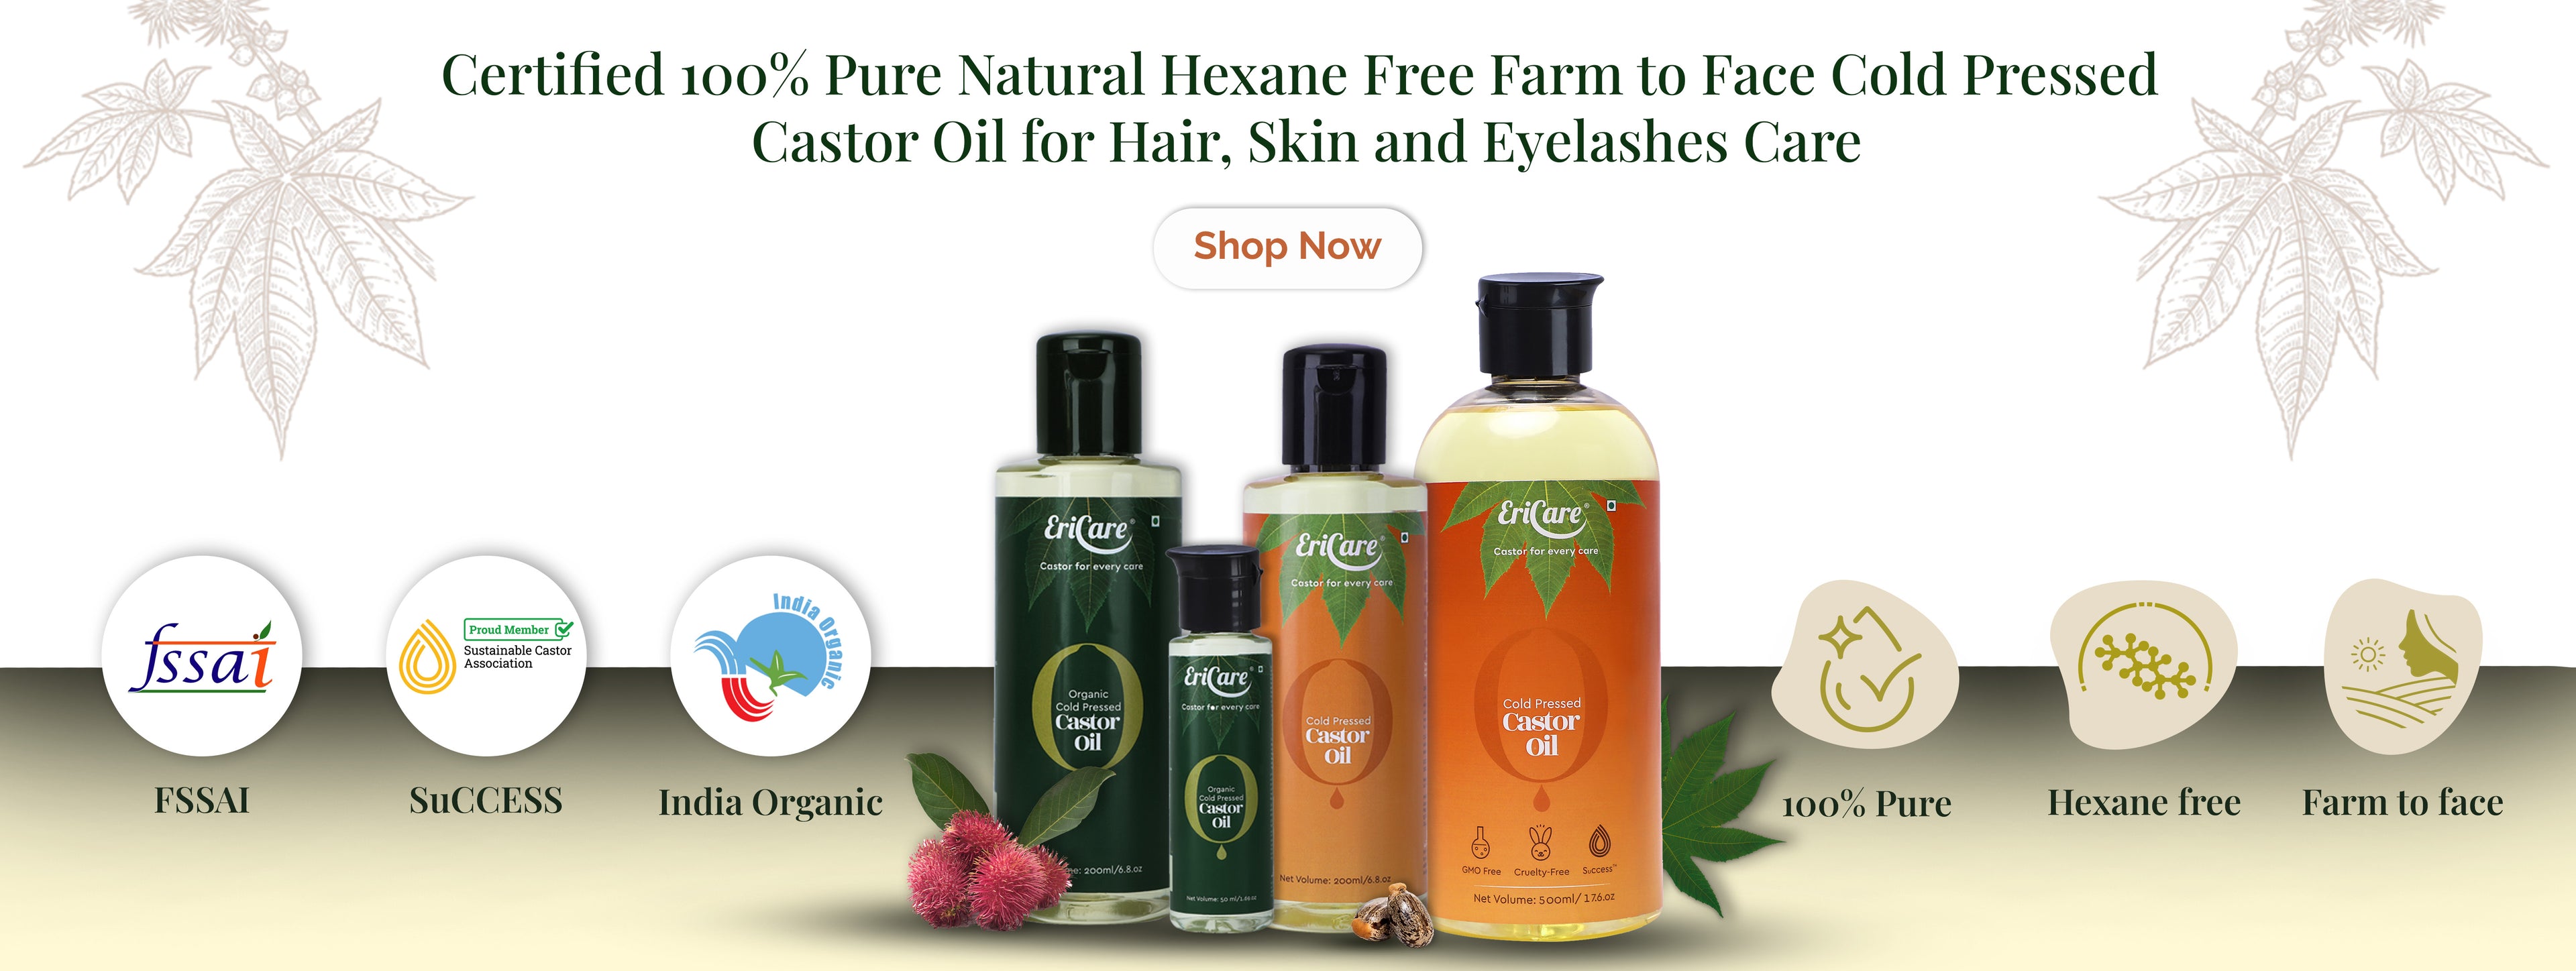 100% Pure Hexane Free Organic and Cold Pressed Castor Oil by EriCare